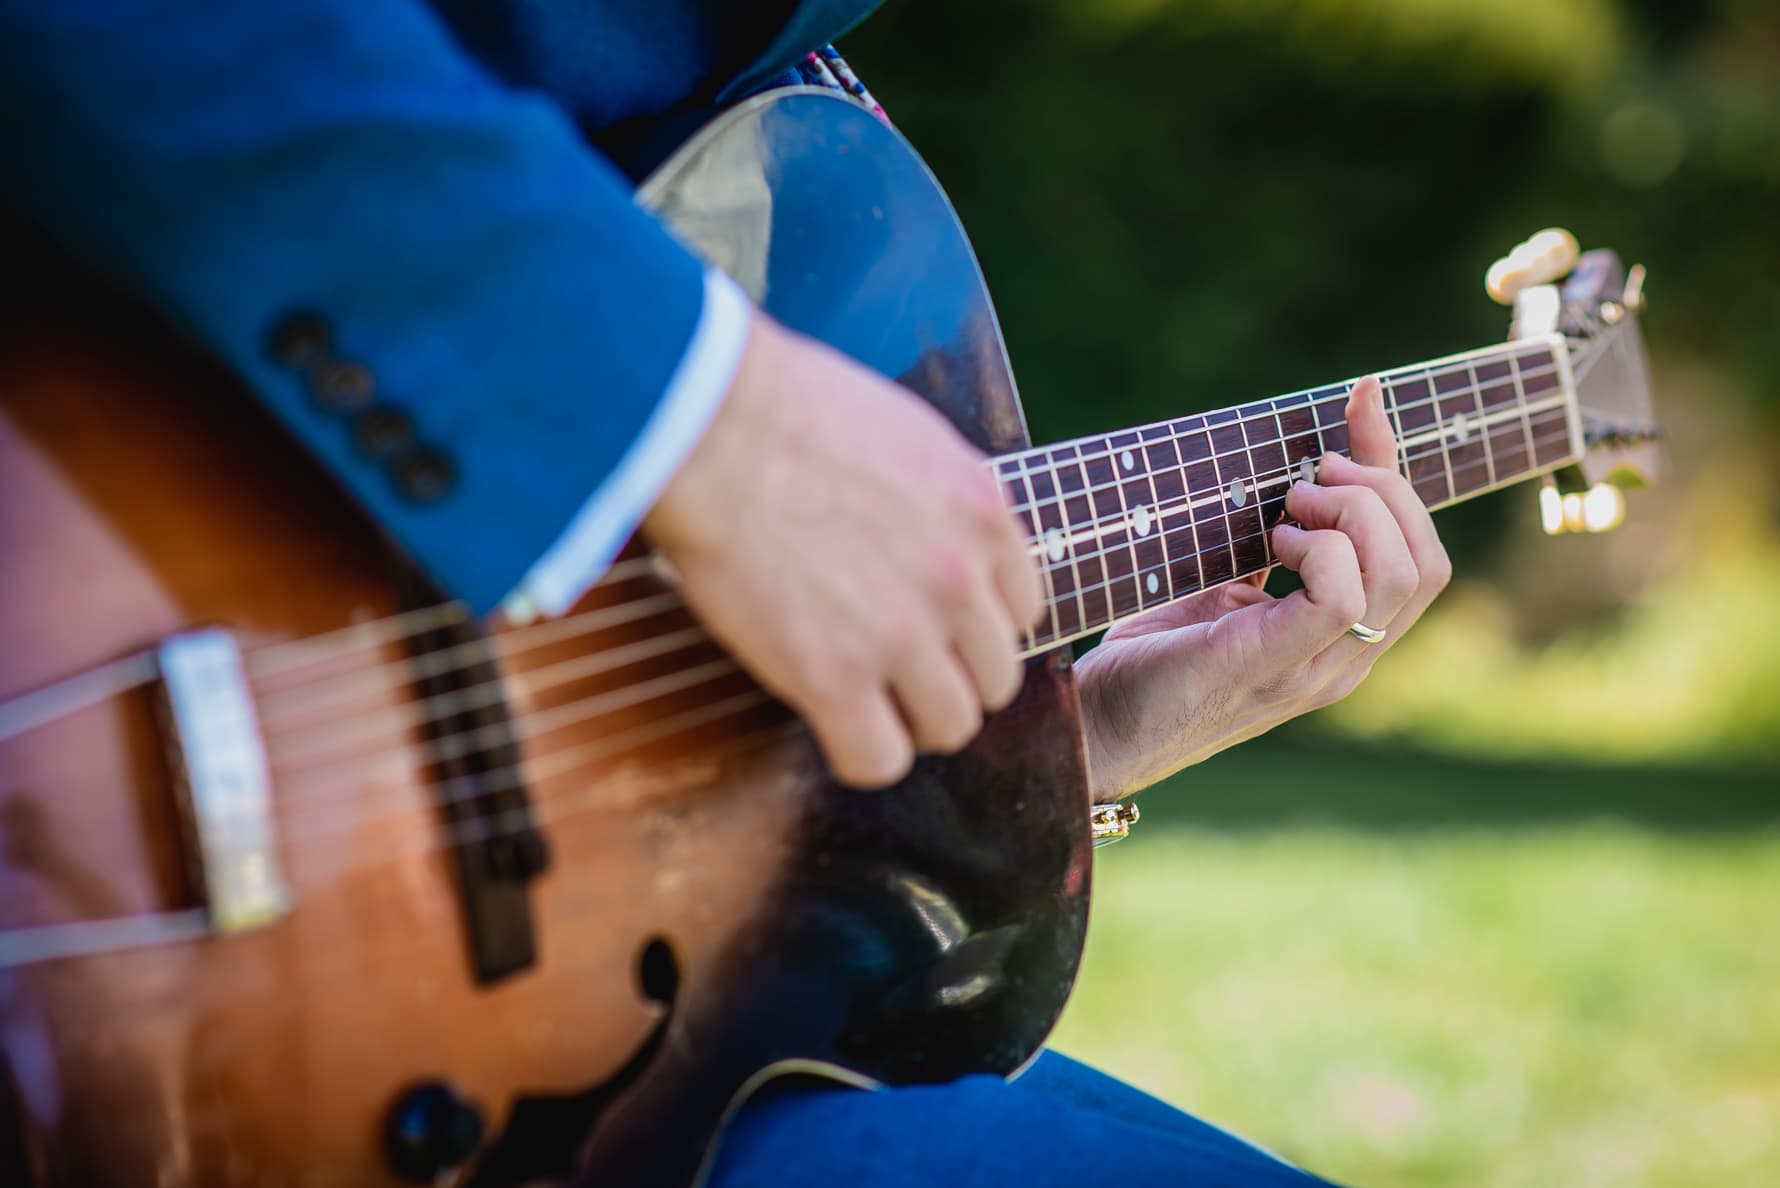 A guitarist playing a barre chord at a wedding reception.